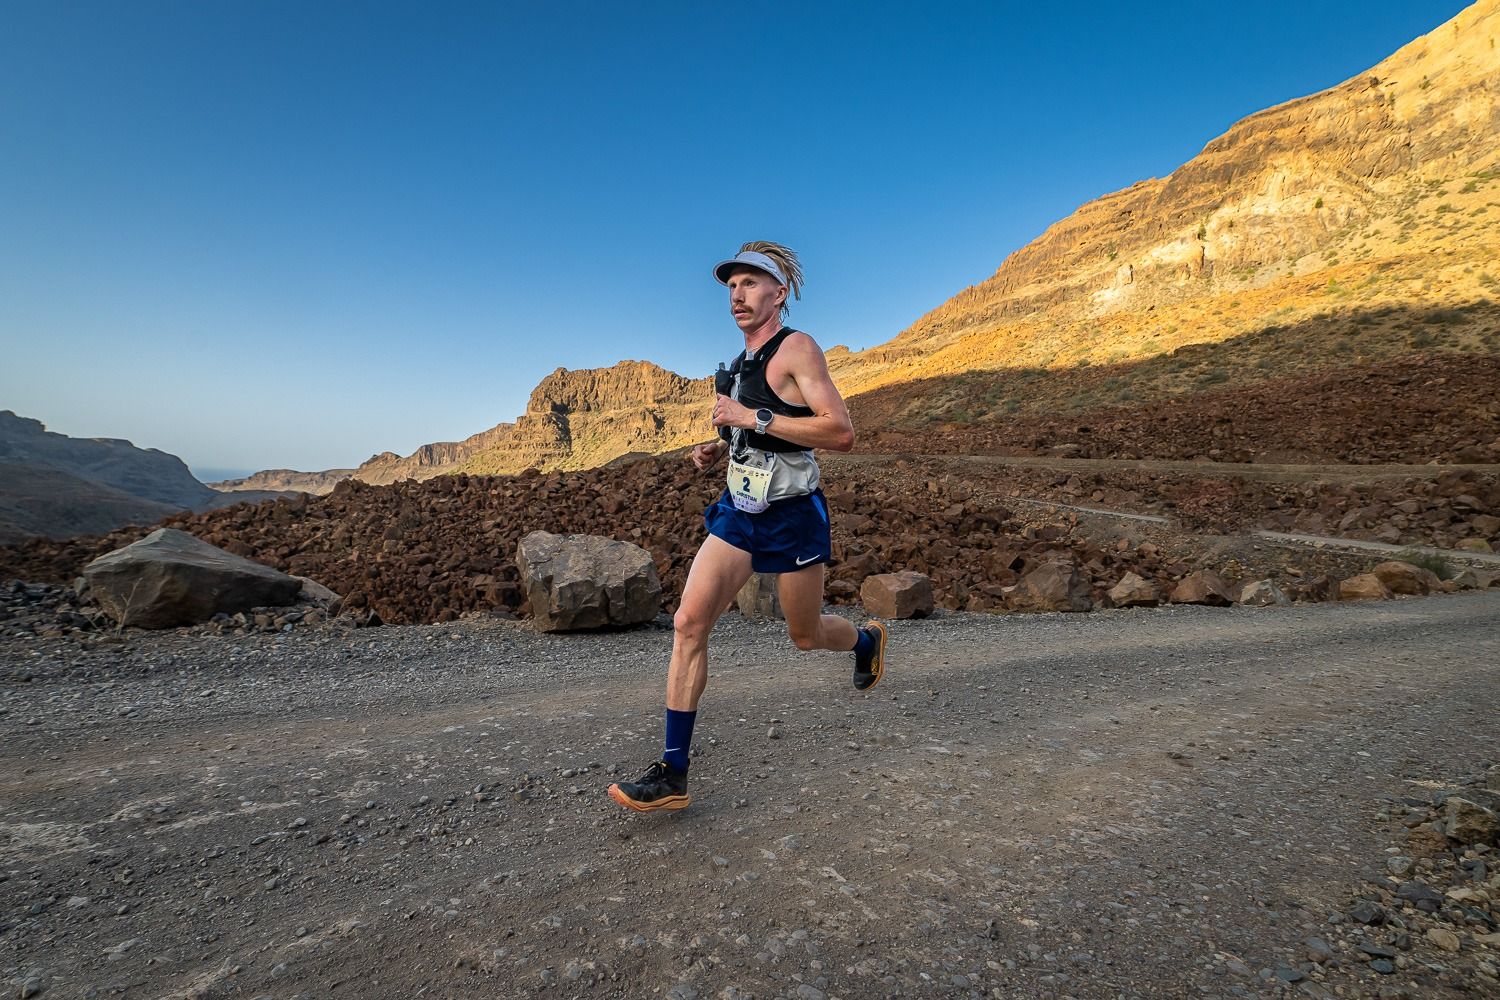 Christian Allen contests the long race at Sky Gran Canaria